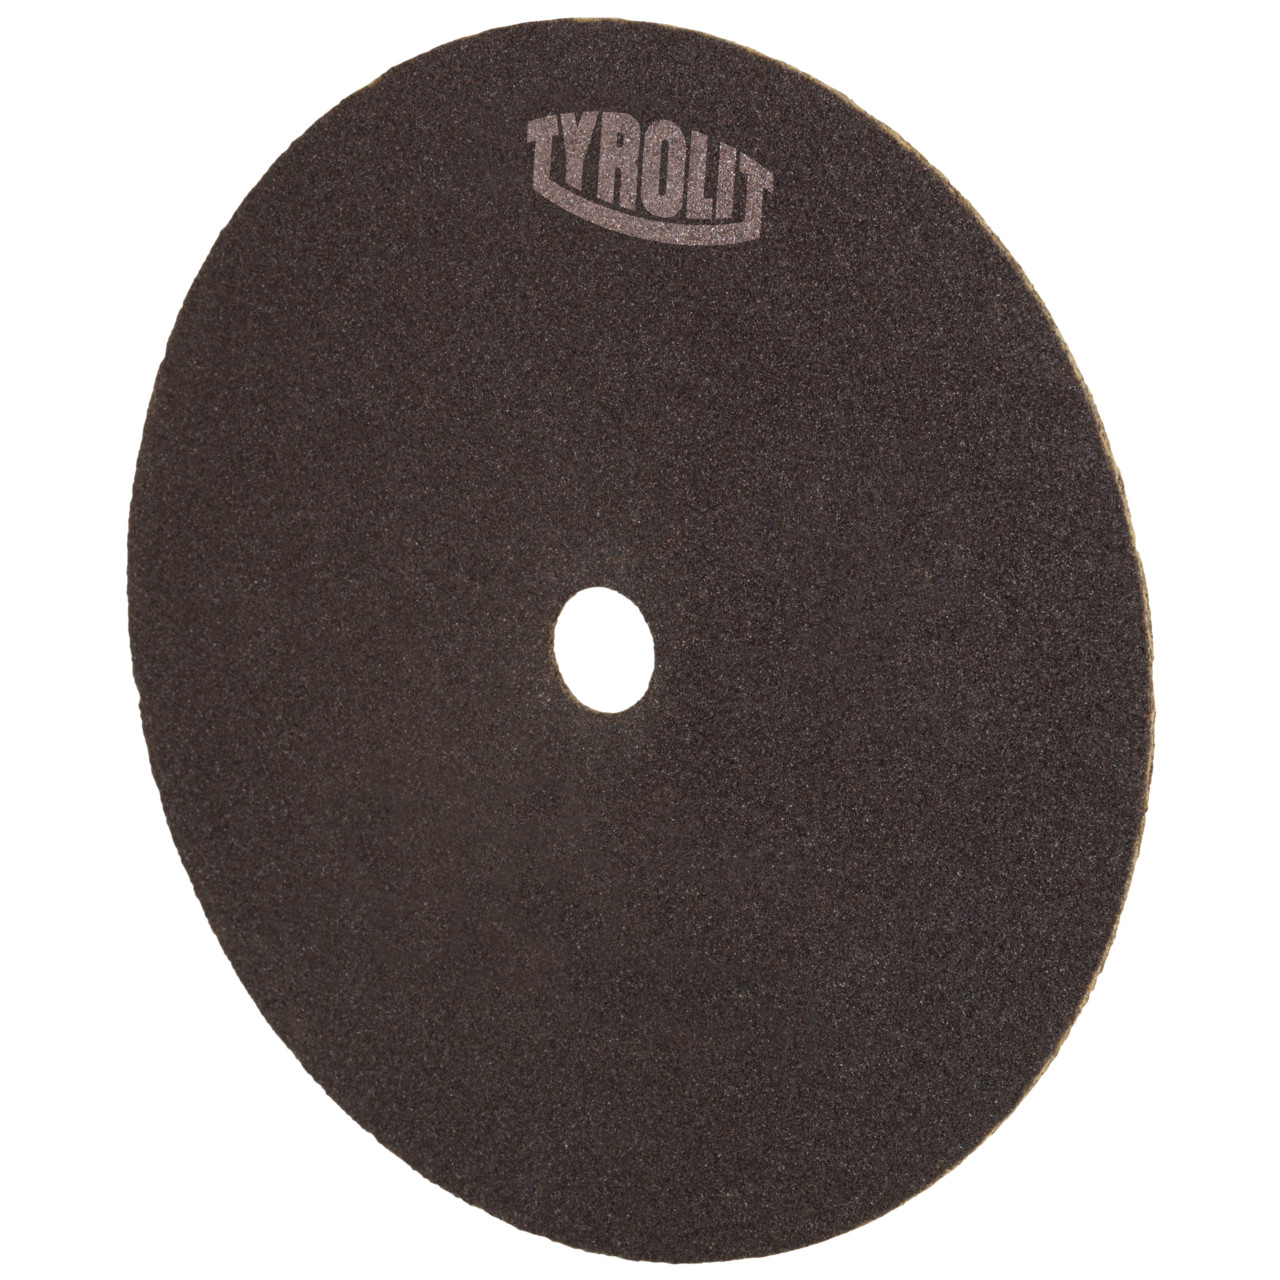 Tyrolit Cutting disc for cutting and saw sharpening DxDxH 180x1x32 For steel and HSS, shape: 41N - straight version (non-woven cutting disc), Art. 675283